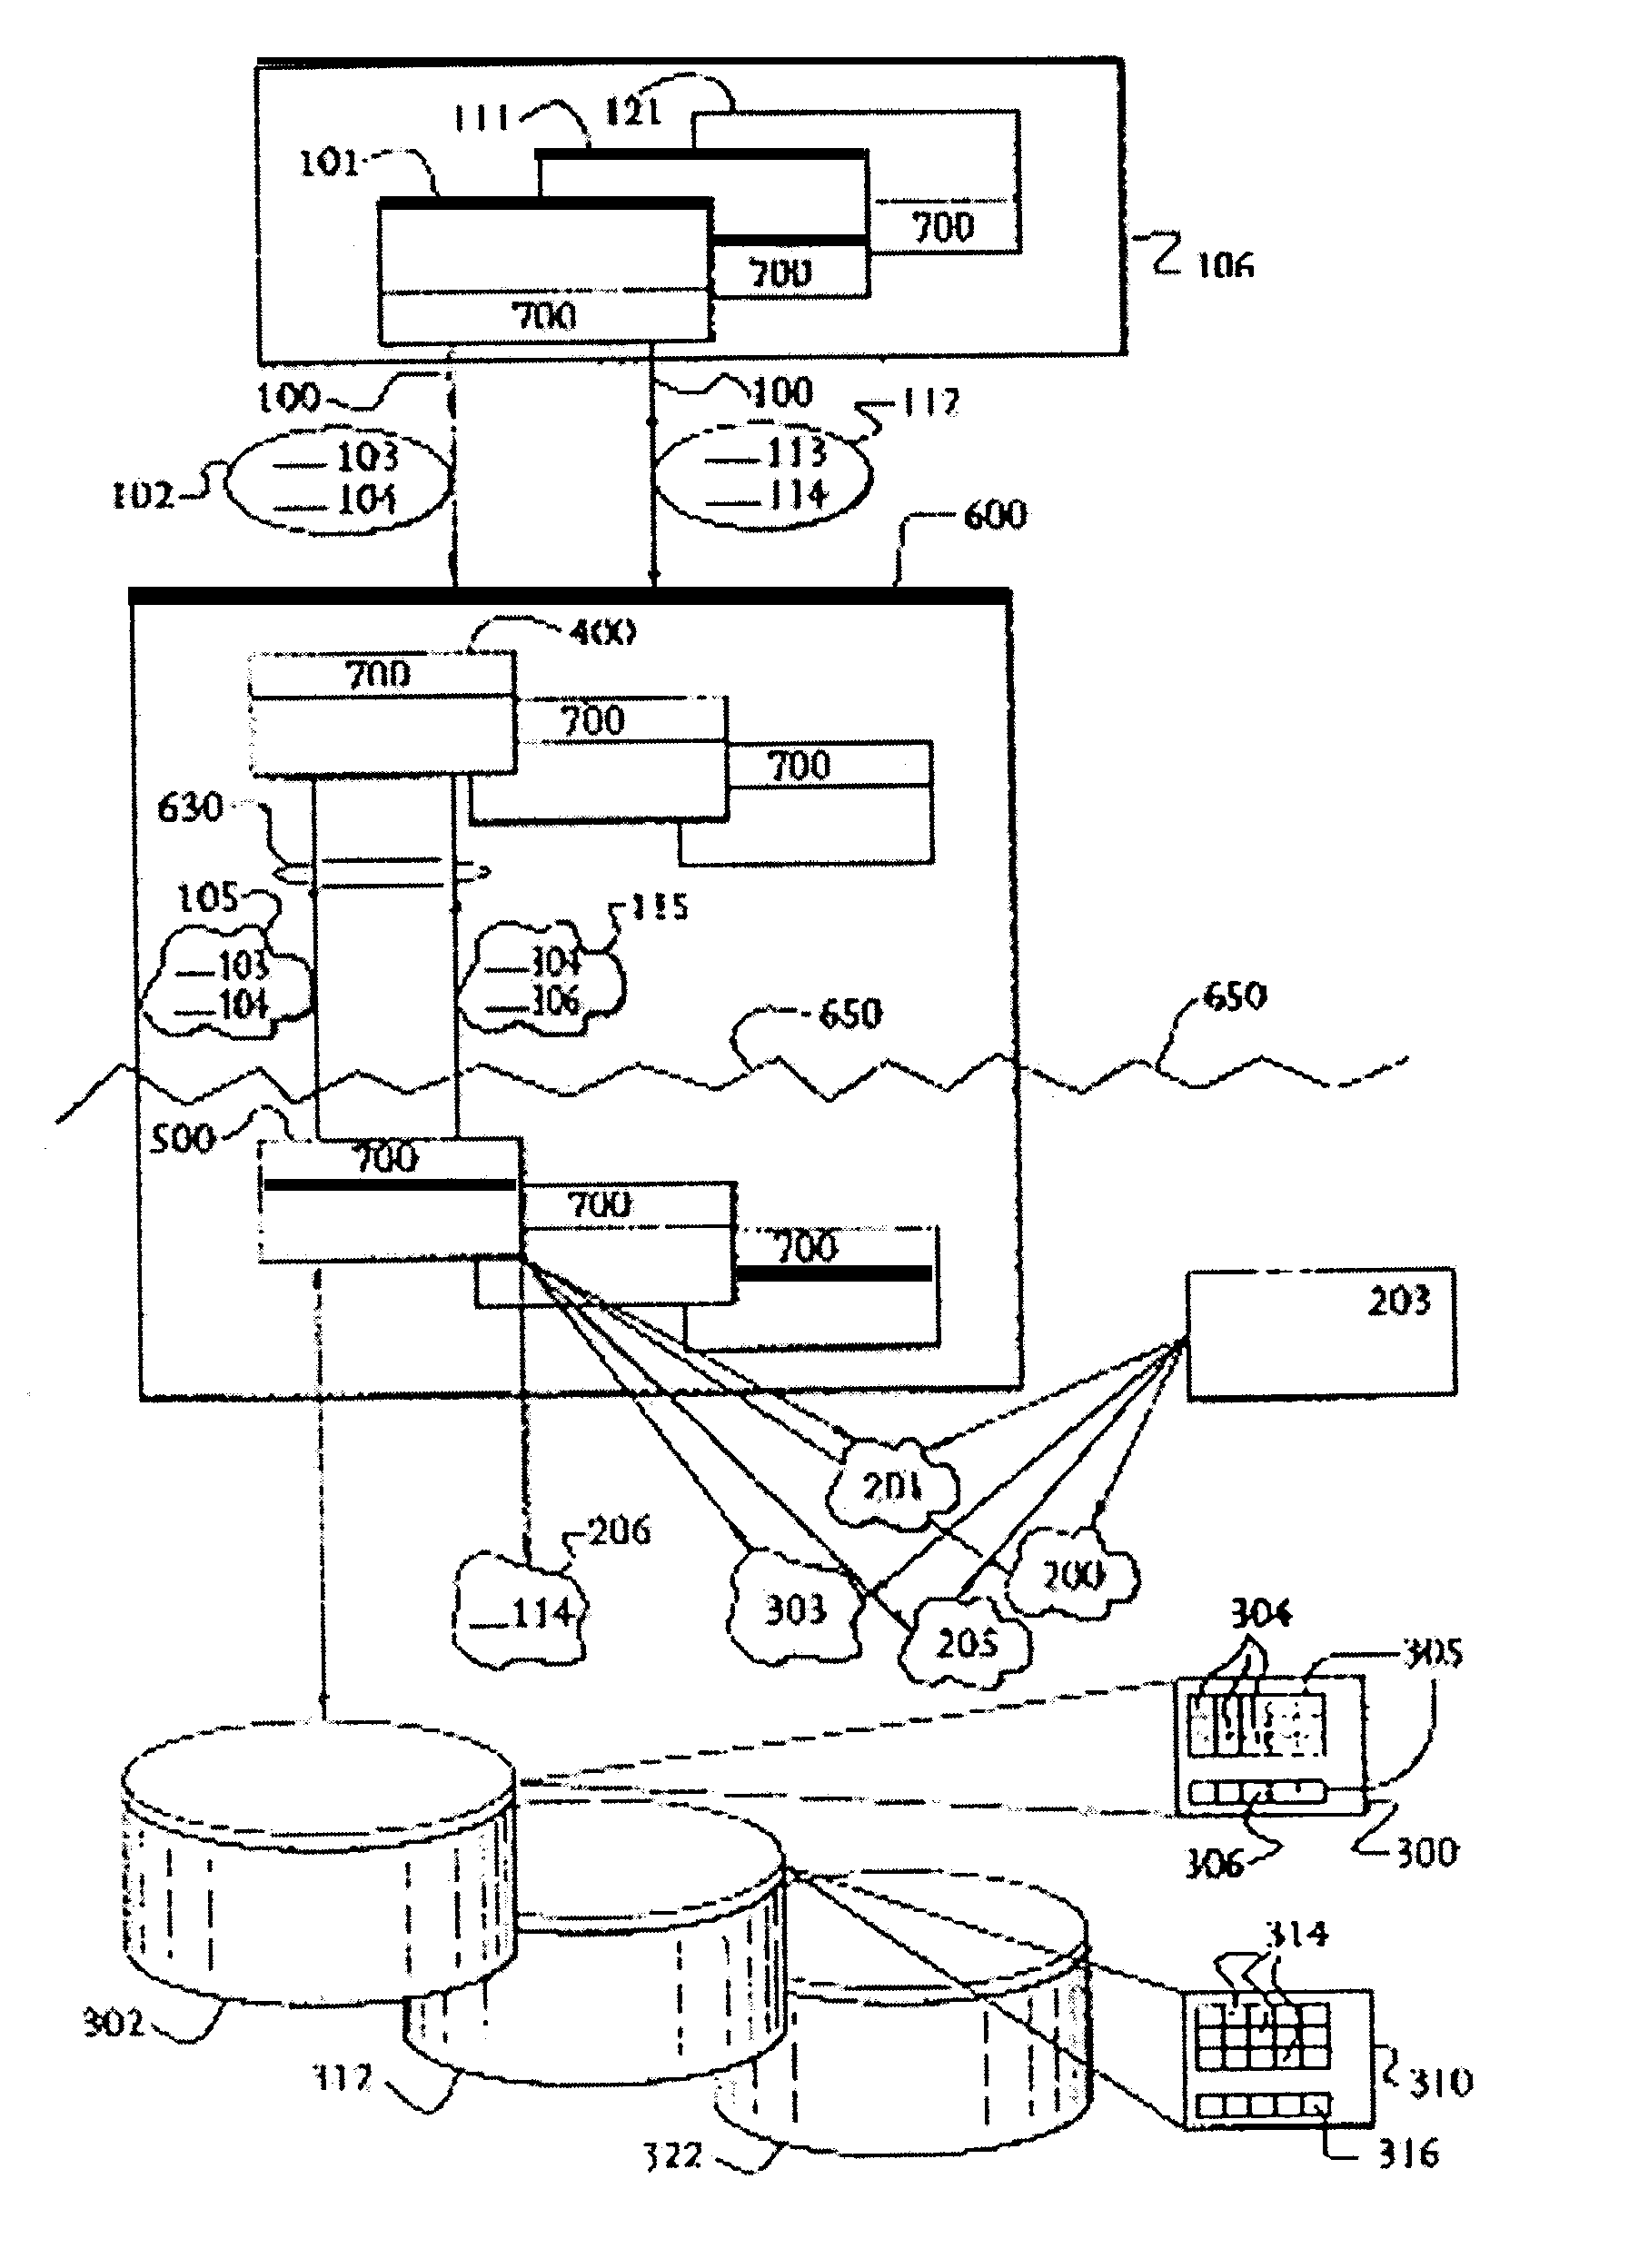 Dynamic class inheritance and distributed caching with object relational mapping and cartesian model support in a database manipulation and mapping system